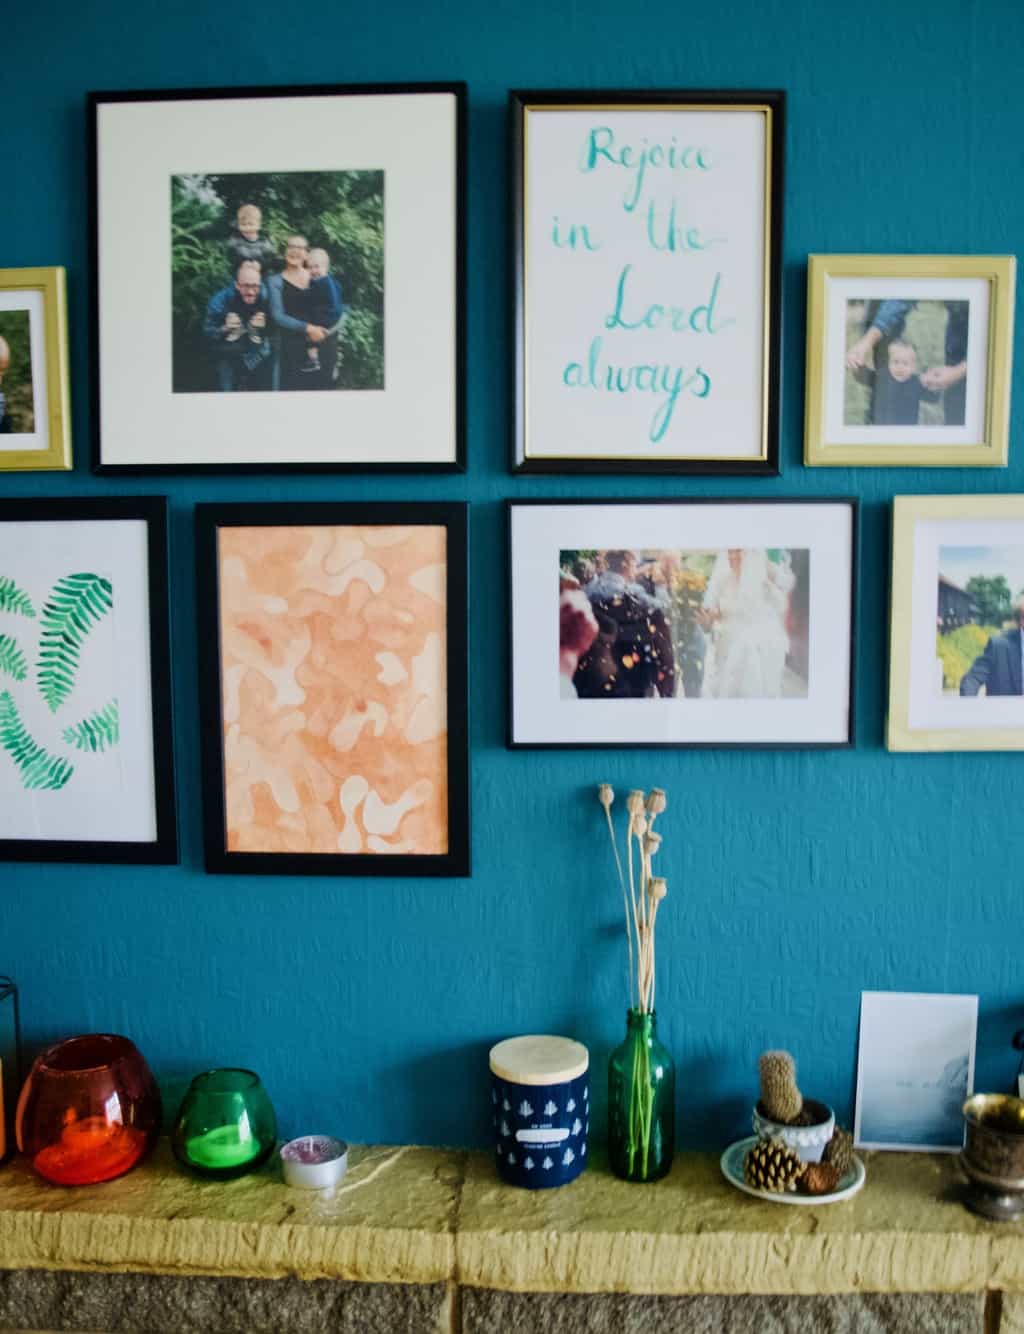 How to install a gallery wall in 5 easy steps